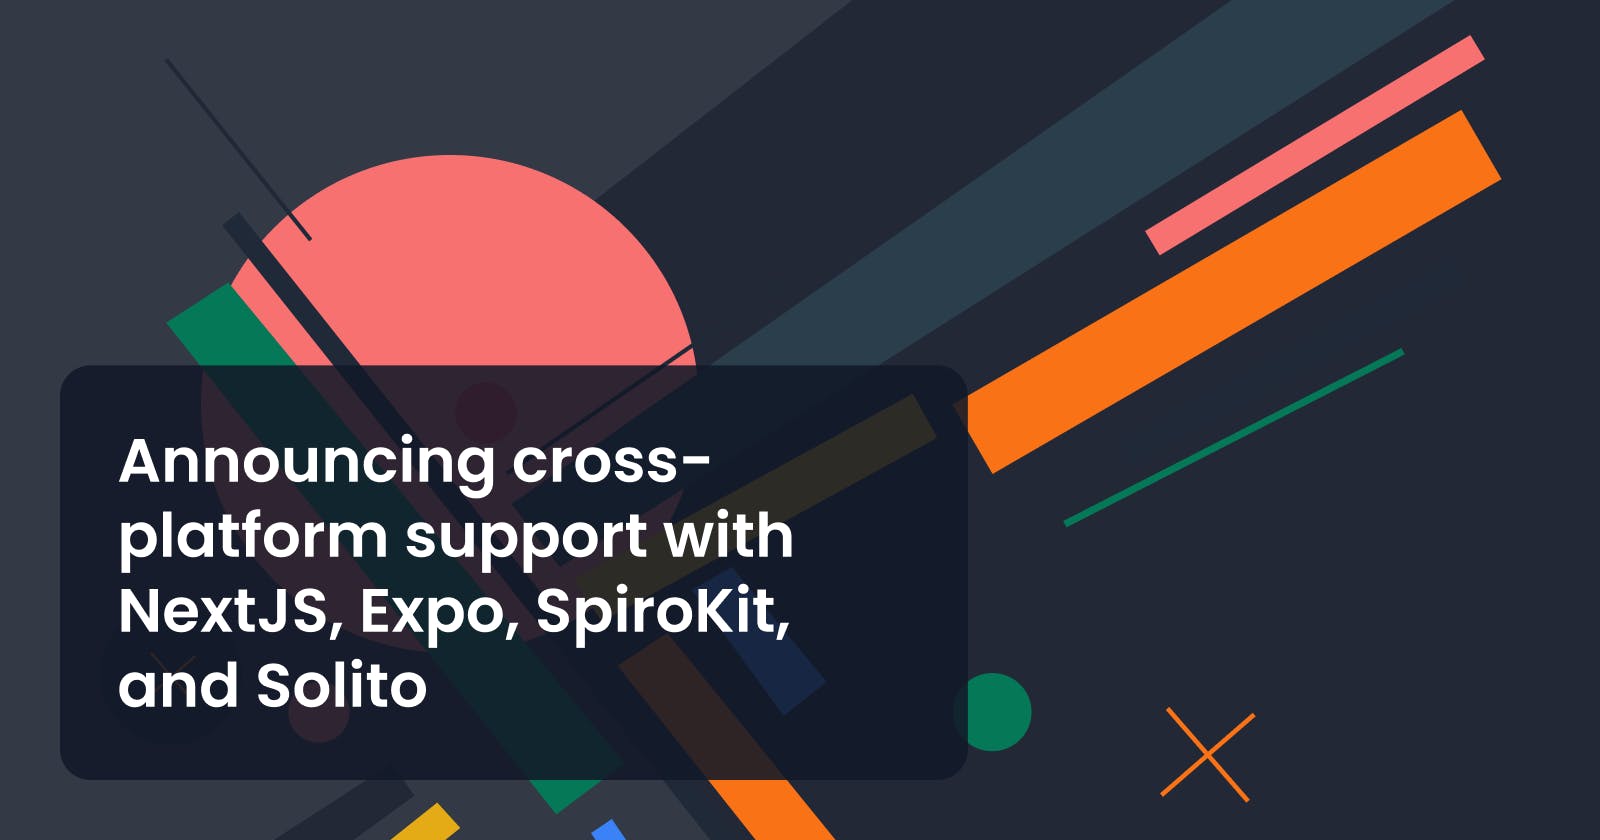 Announcing cross-platform support with NextJS, Expo, SpiroKit, and Solito